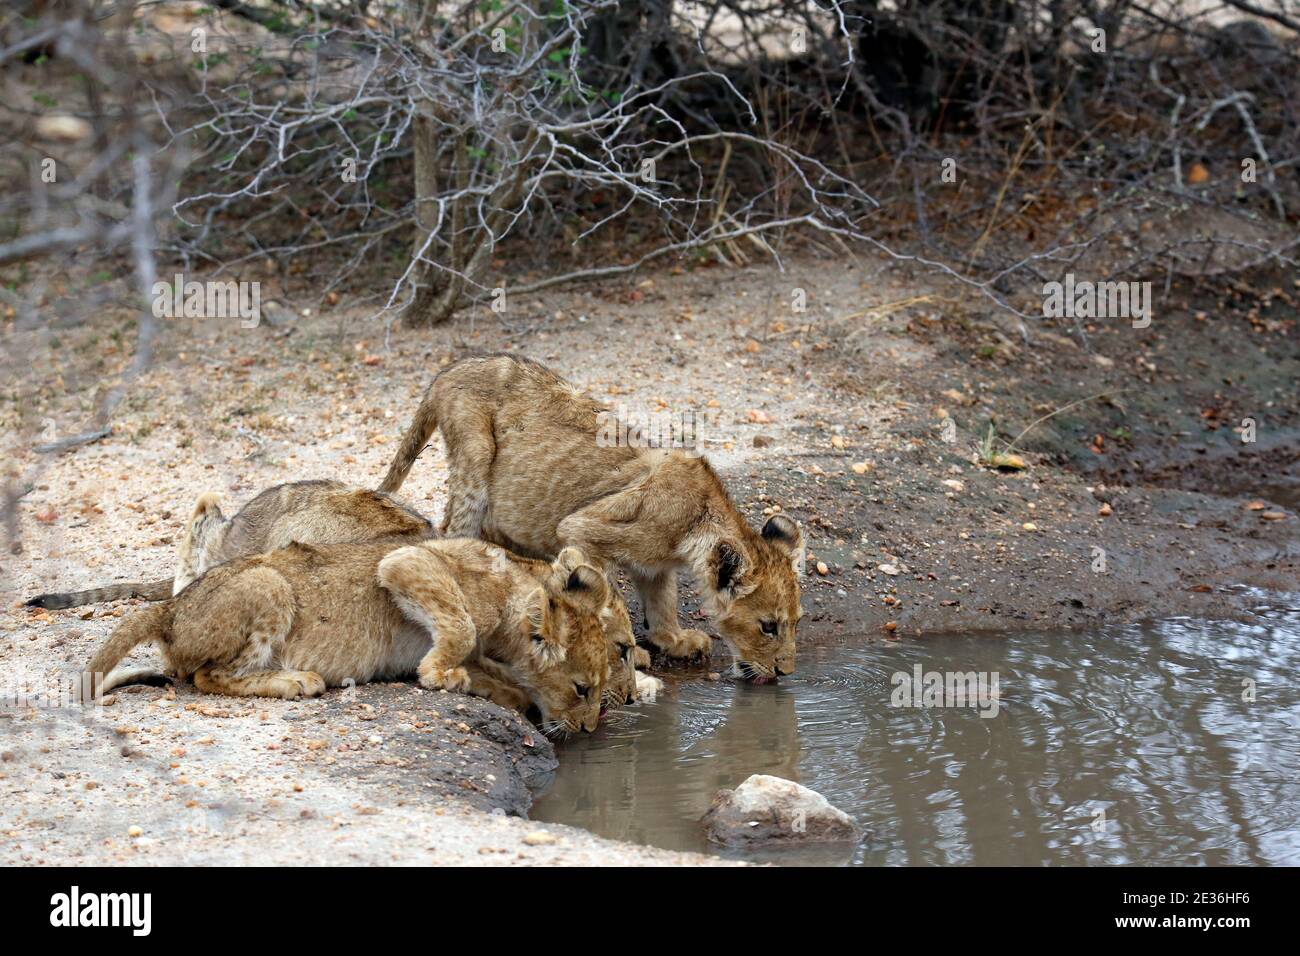 Three Lion Cubs, Drinking from a Pool. Kruger Park, South Africa Stock Photo